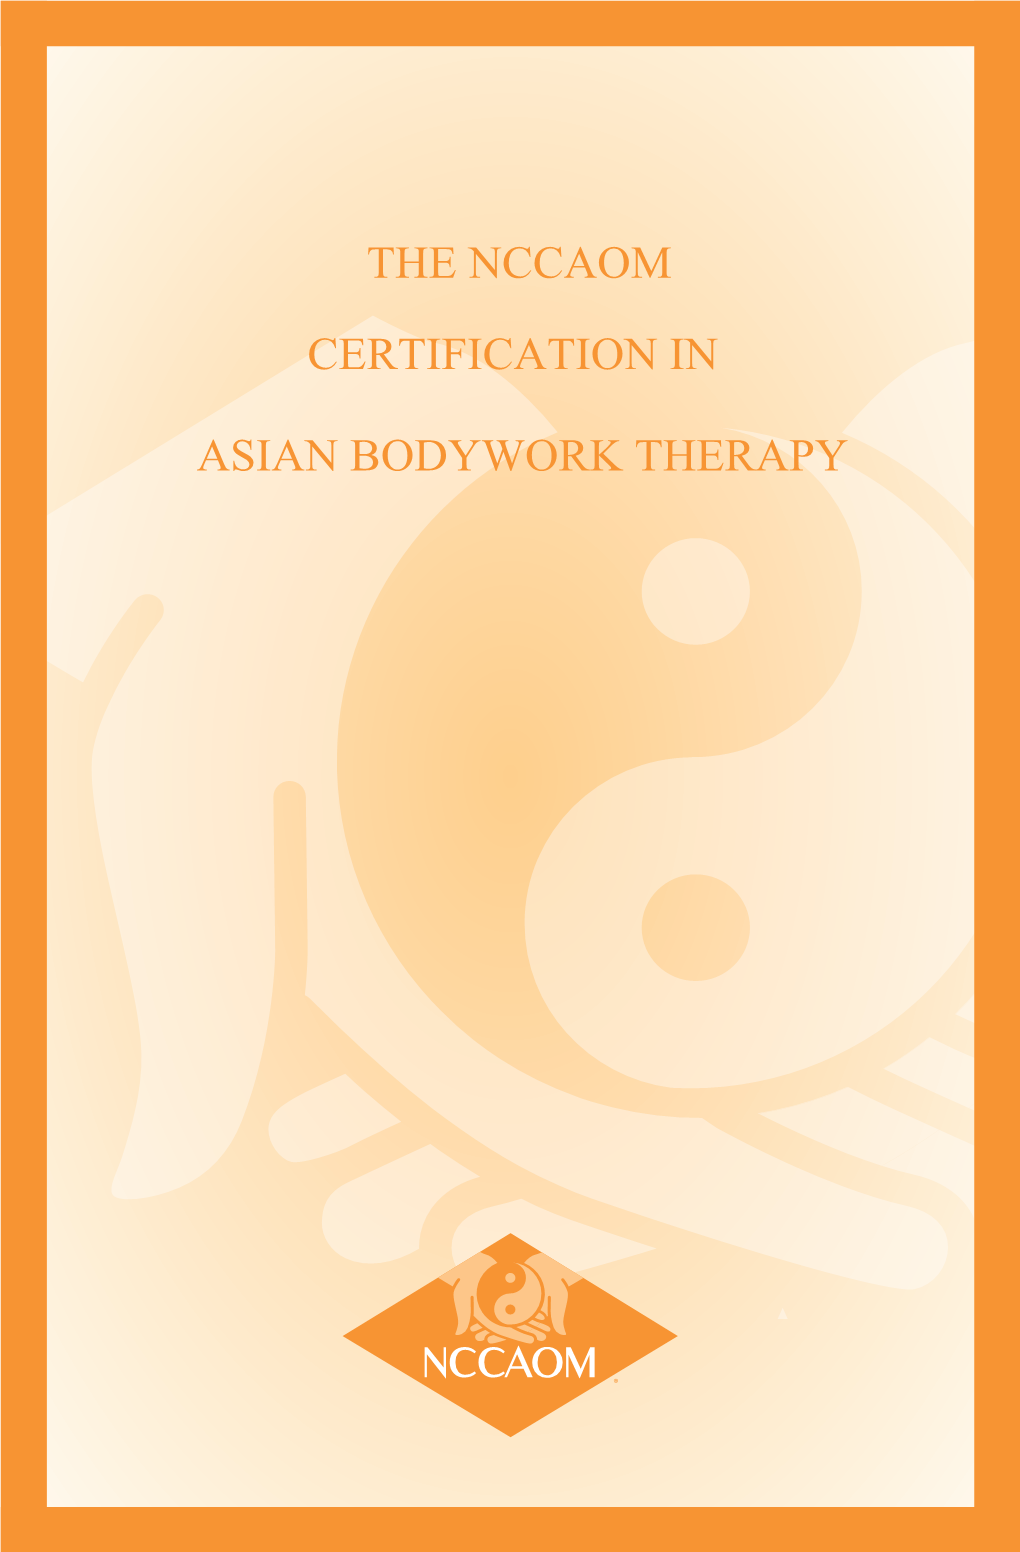 The Nccaom Certification in Asian Bodywork Therapy